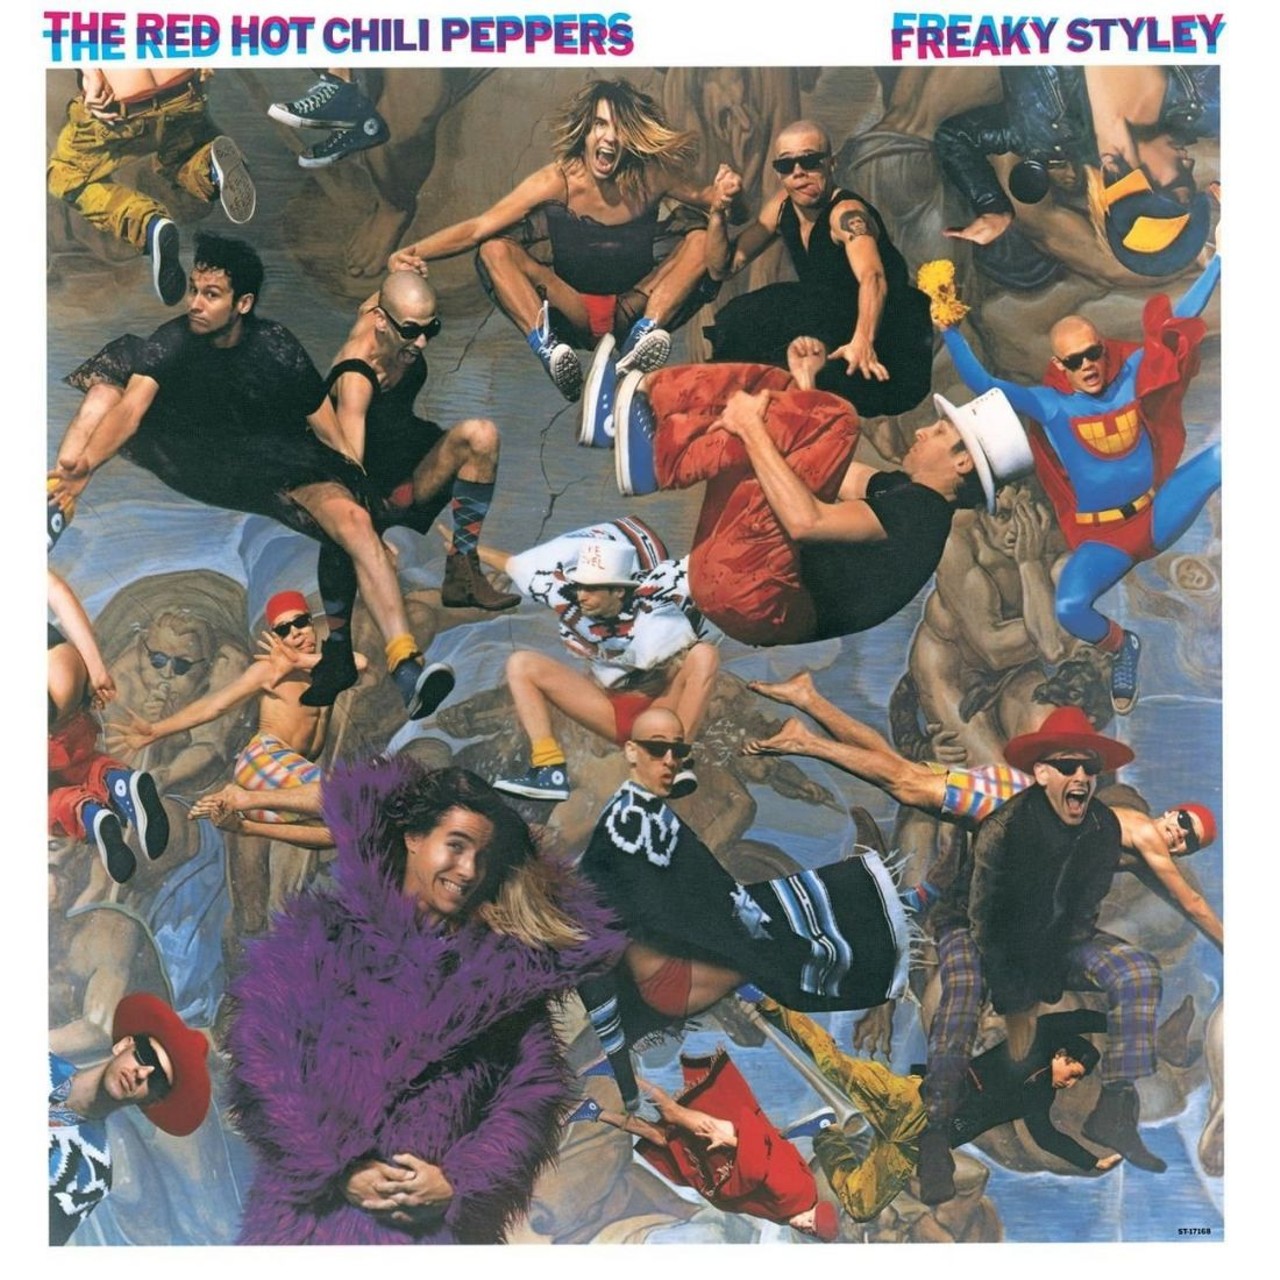 The Red Hot Chili Peppers - &#147;Freaky Styley&#148;
Well, maybe you knew this already, that the Red Hot Chili Peppers made the pilgrimage to Michigan to record with their hero George Clinton. The album was recorded at United Sound Studios in Detroit.